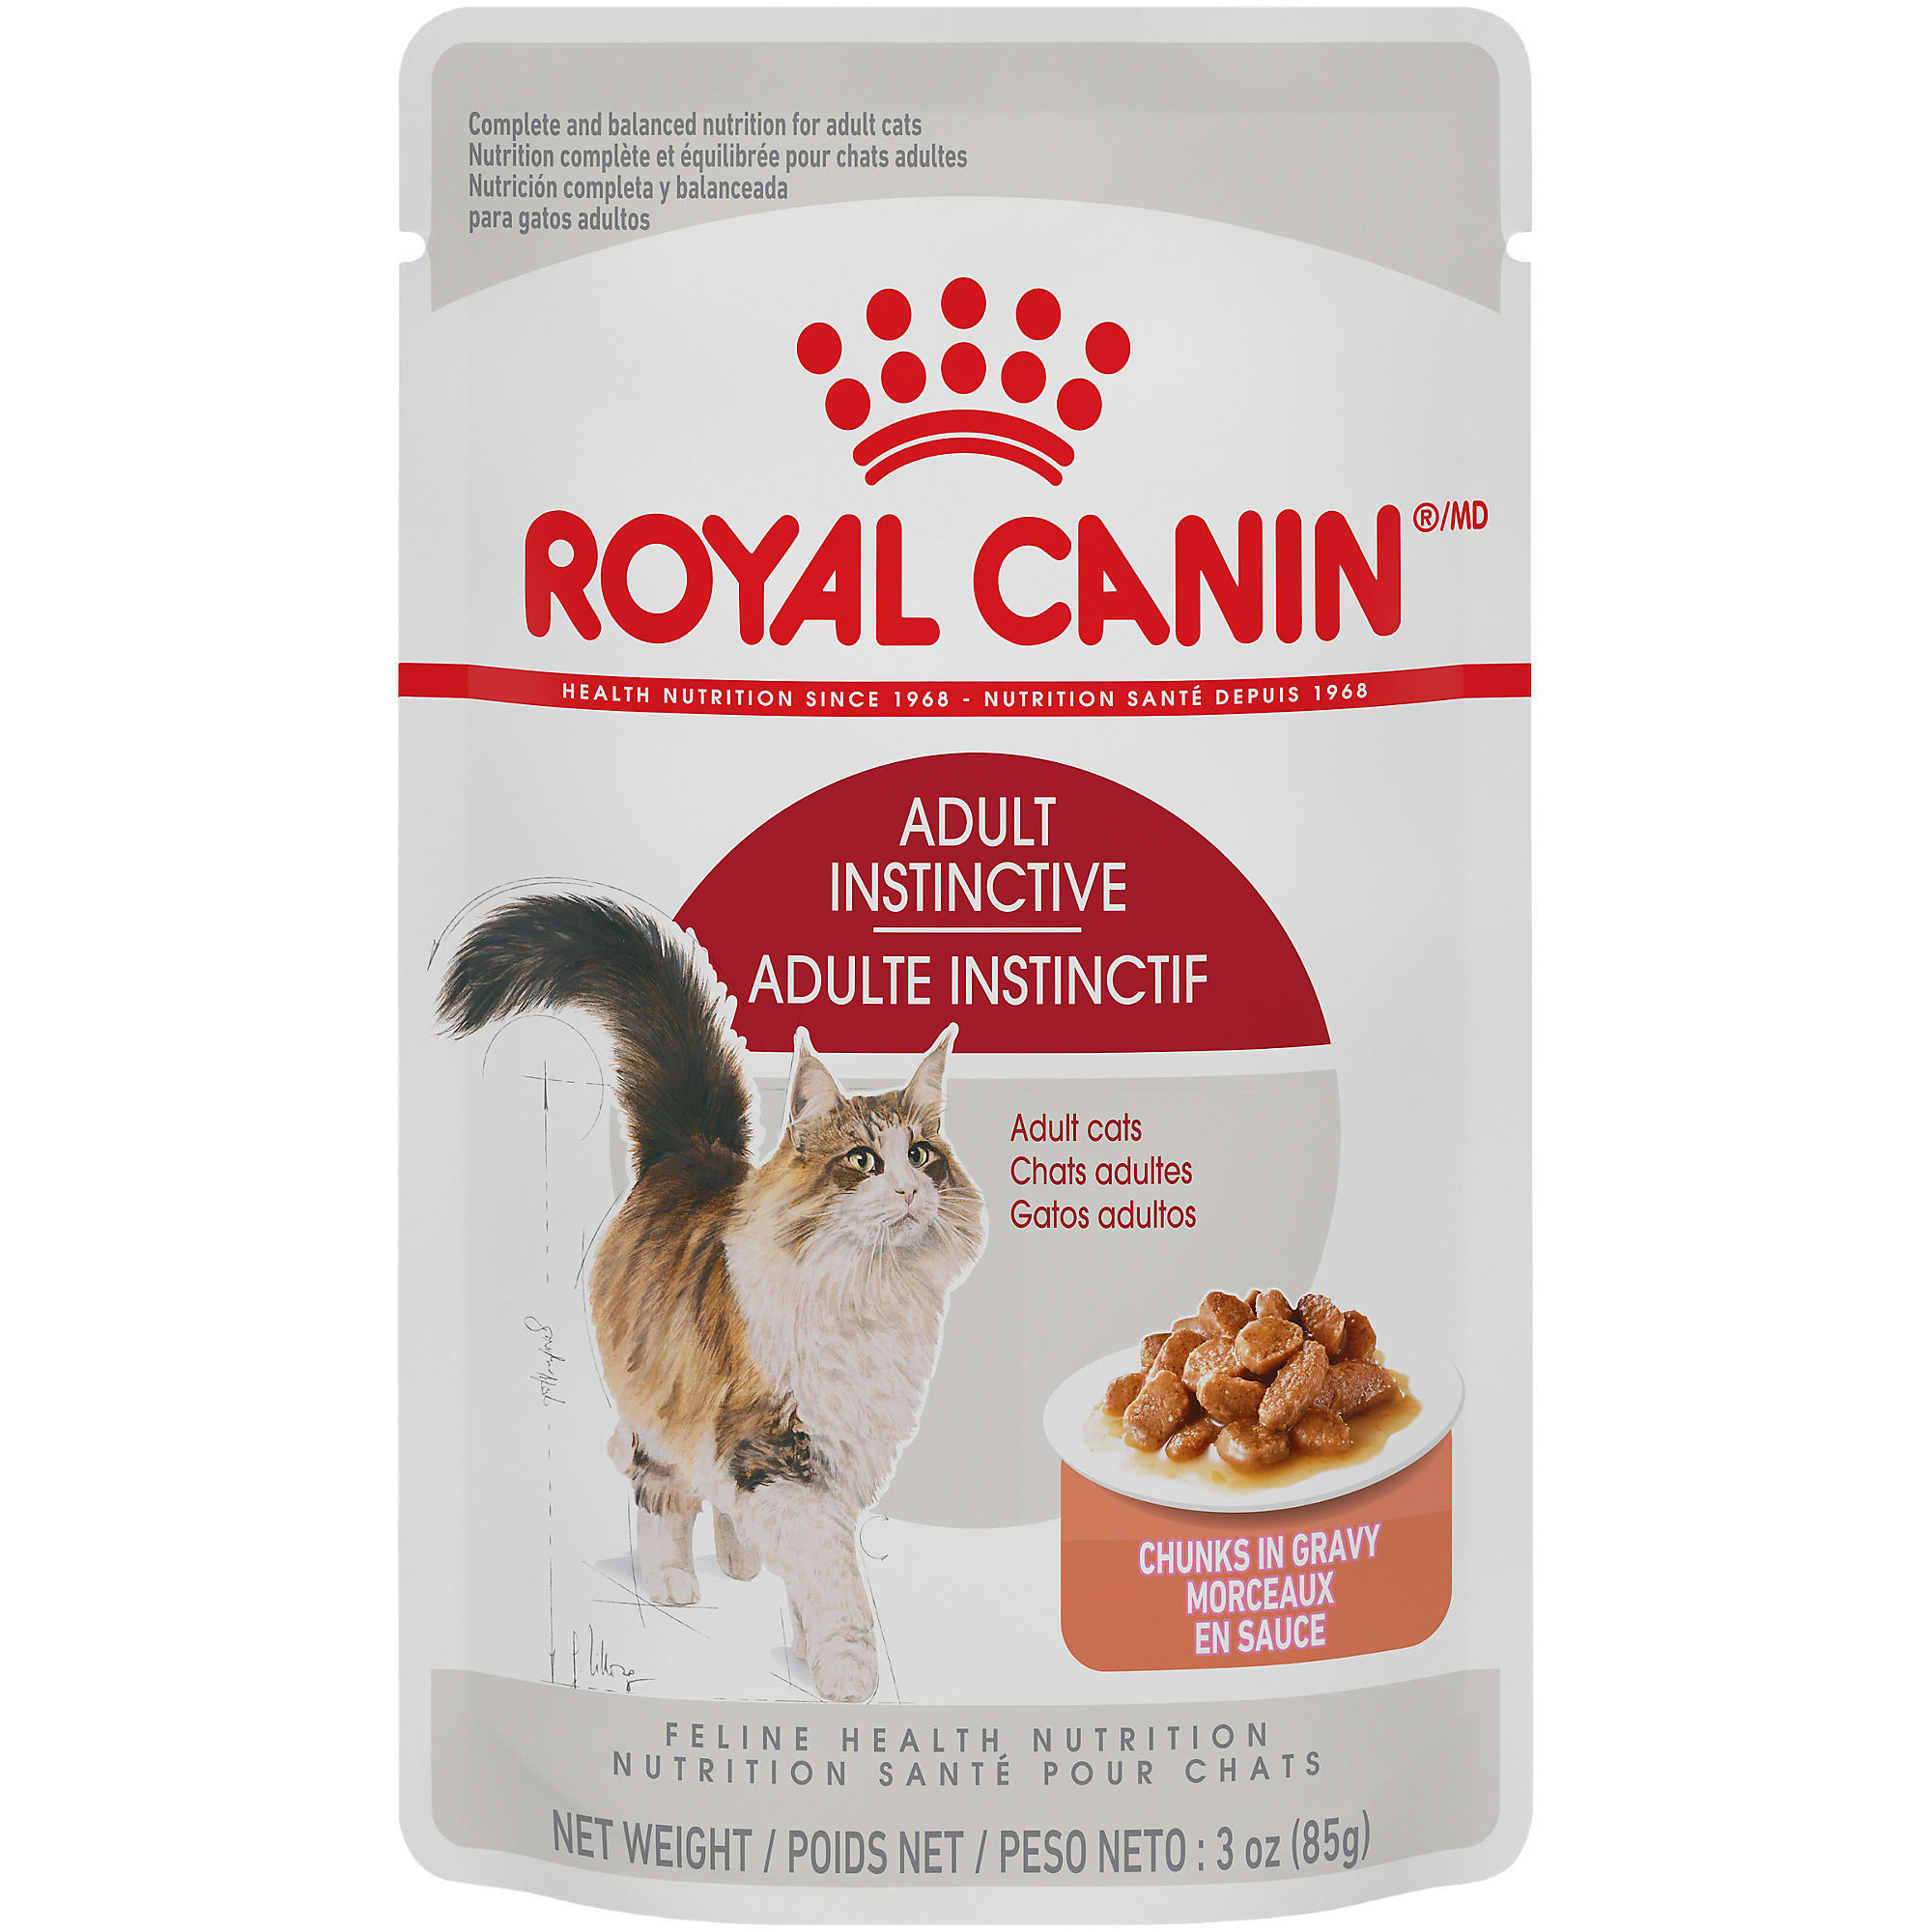 Royal Canin Adult Cat Instinctive Chunks in Gravy Wet Cat Food Pouch, 3